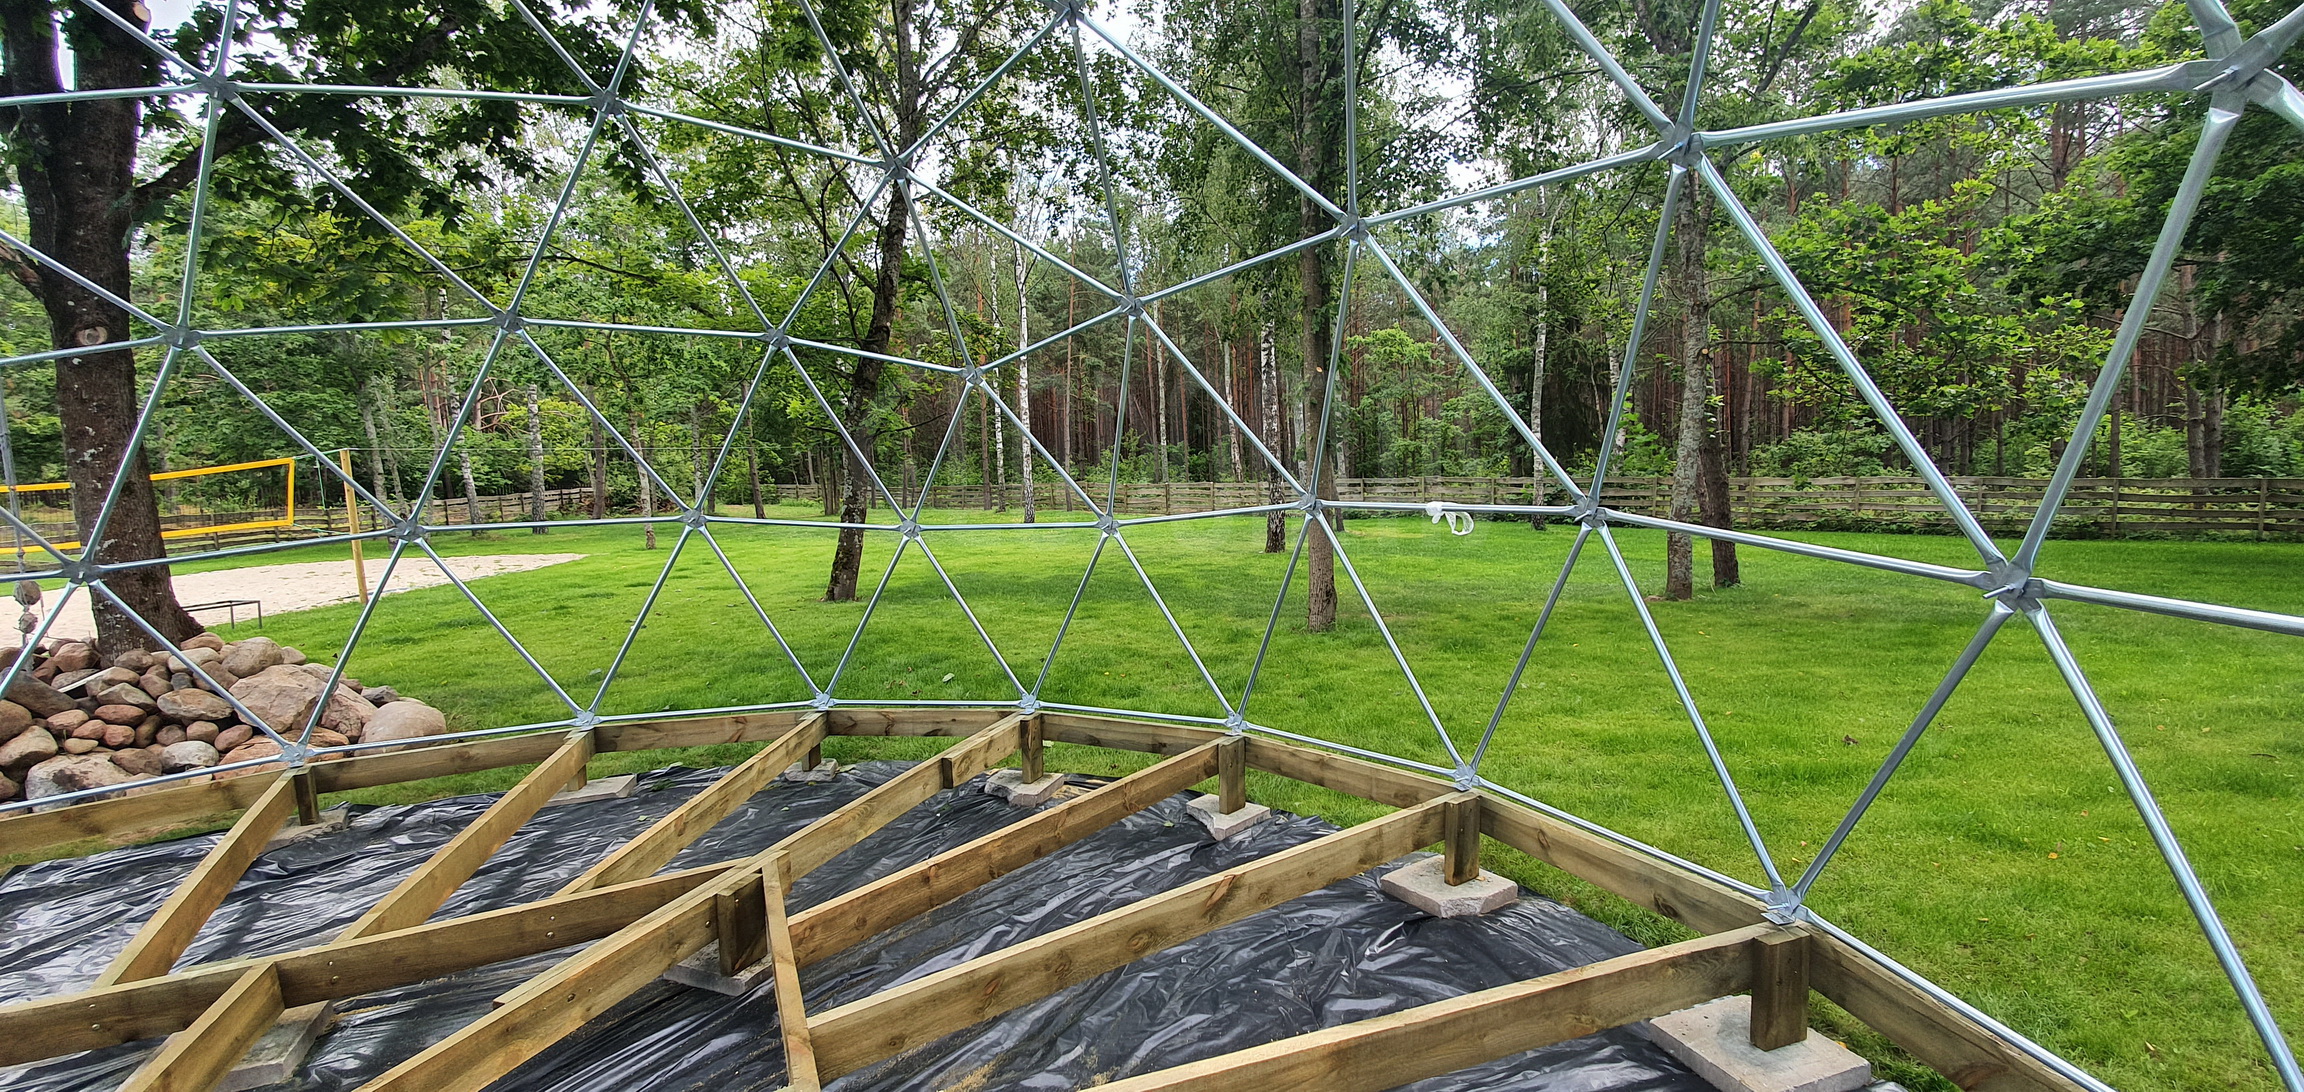 50m² Glamping Dome Ø8m & TREE DOMES | Recreational area